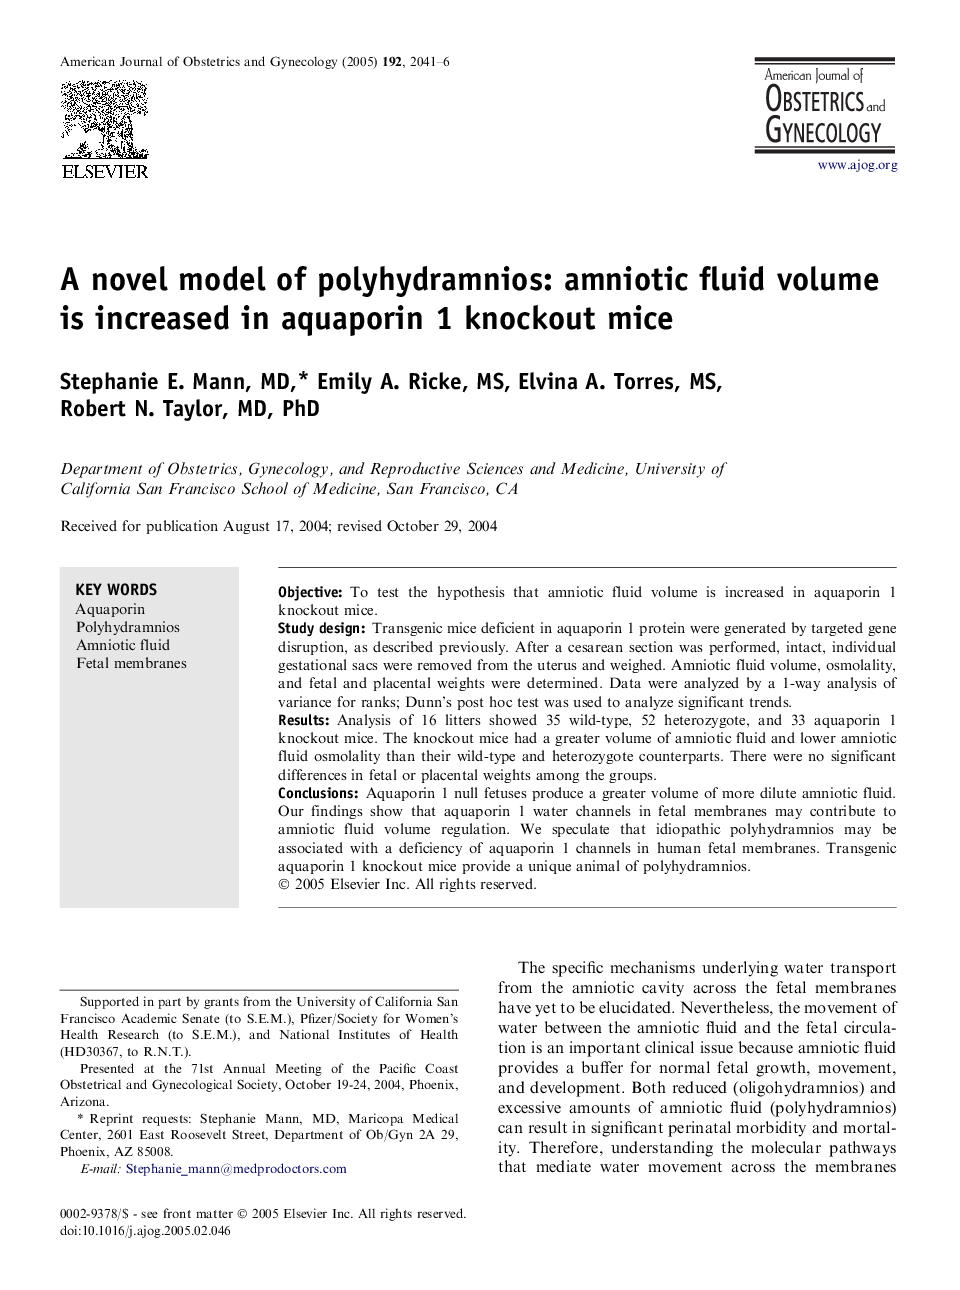 A novel model of polyhydramnios: amniotic fluid volume is increased in aquaporin 1 knockout mice 